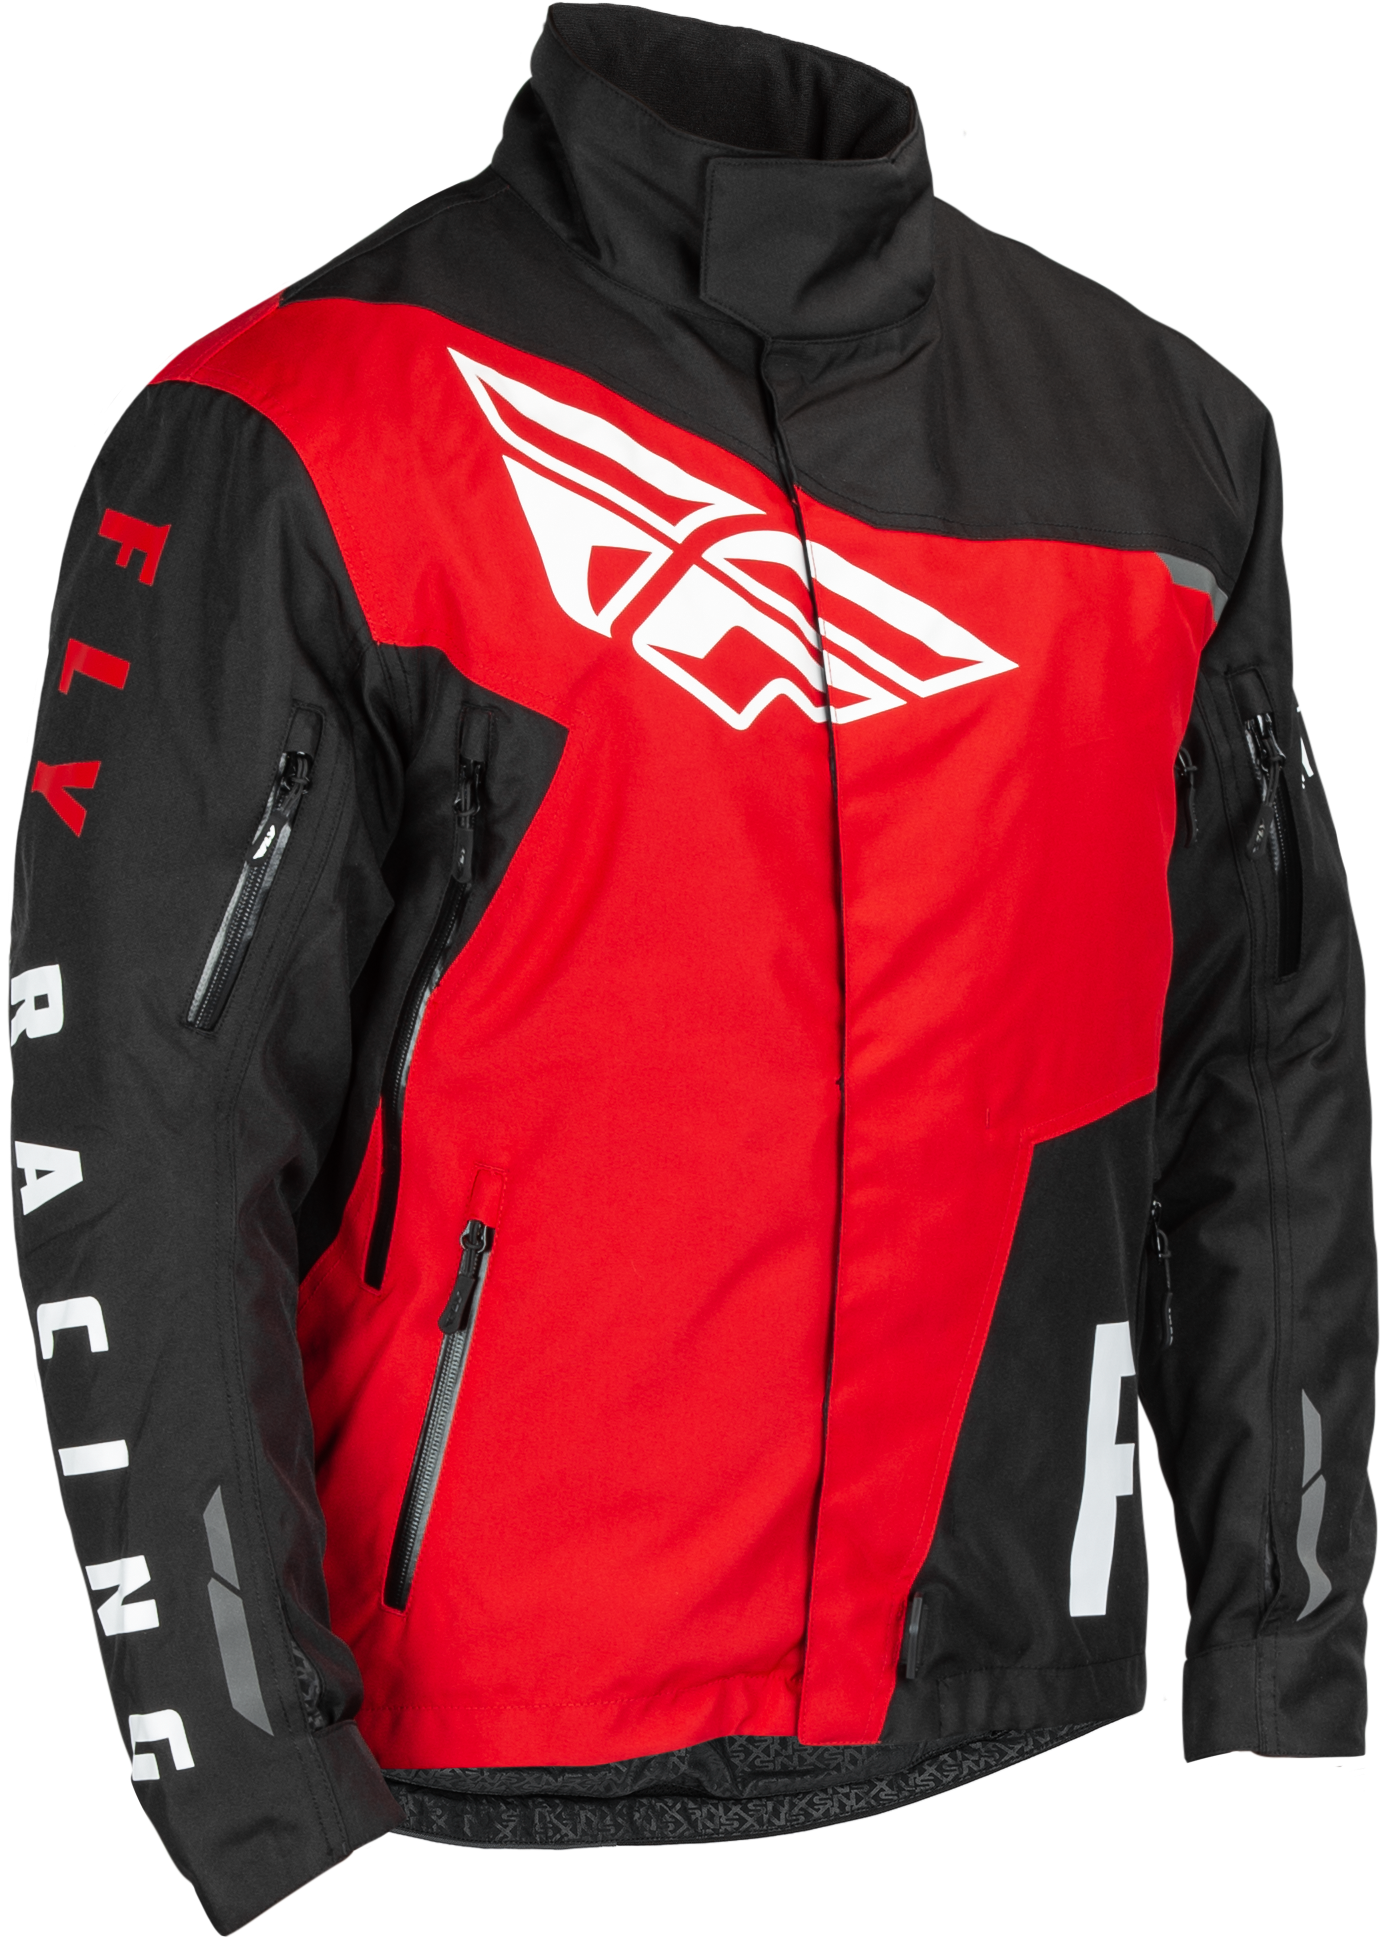 FLY RACING Snx Pro Jacket Black/Red Md 470-5402M